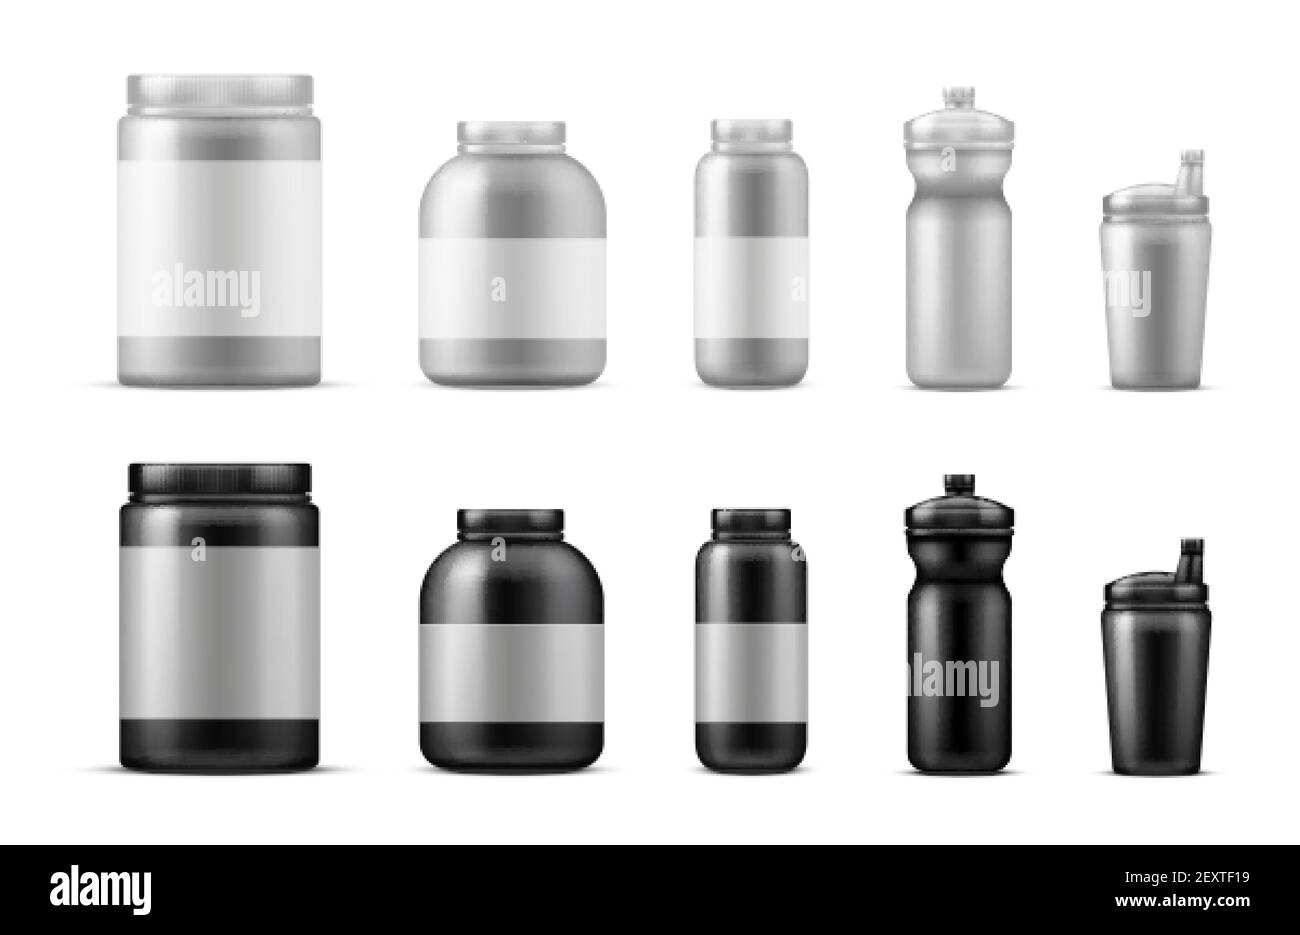 https://c8.alamy.com/comp/2EXTF19/sport-food-containers-realistic-drink-bottles-vector-protein-powder-containers-mockup-isolated-on-white-background-container-plastic-for-workout-protein-to-bodybuilding-illustration-2EXTF19.jpg